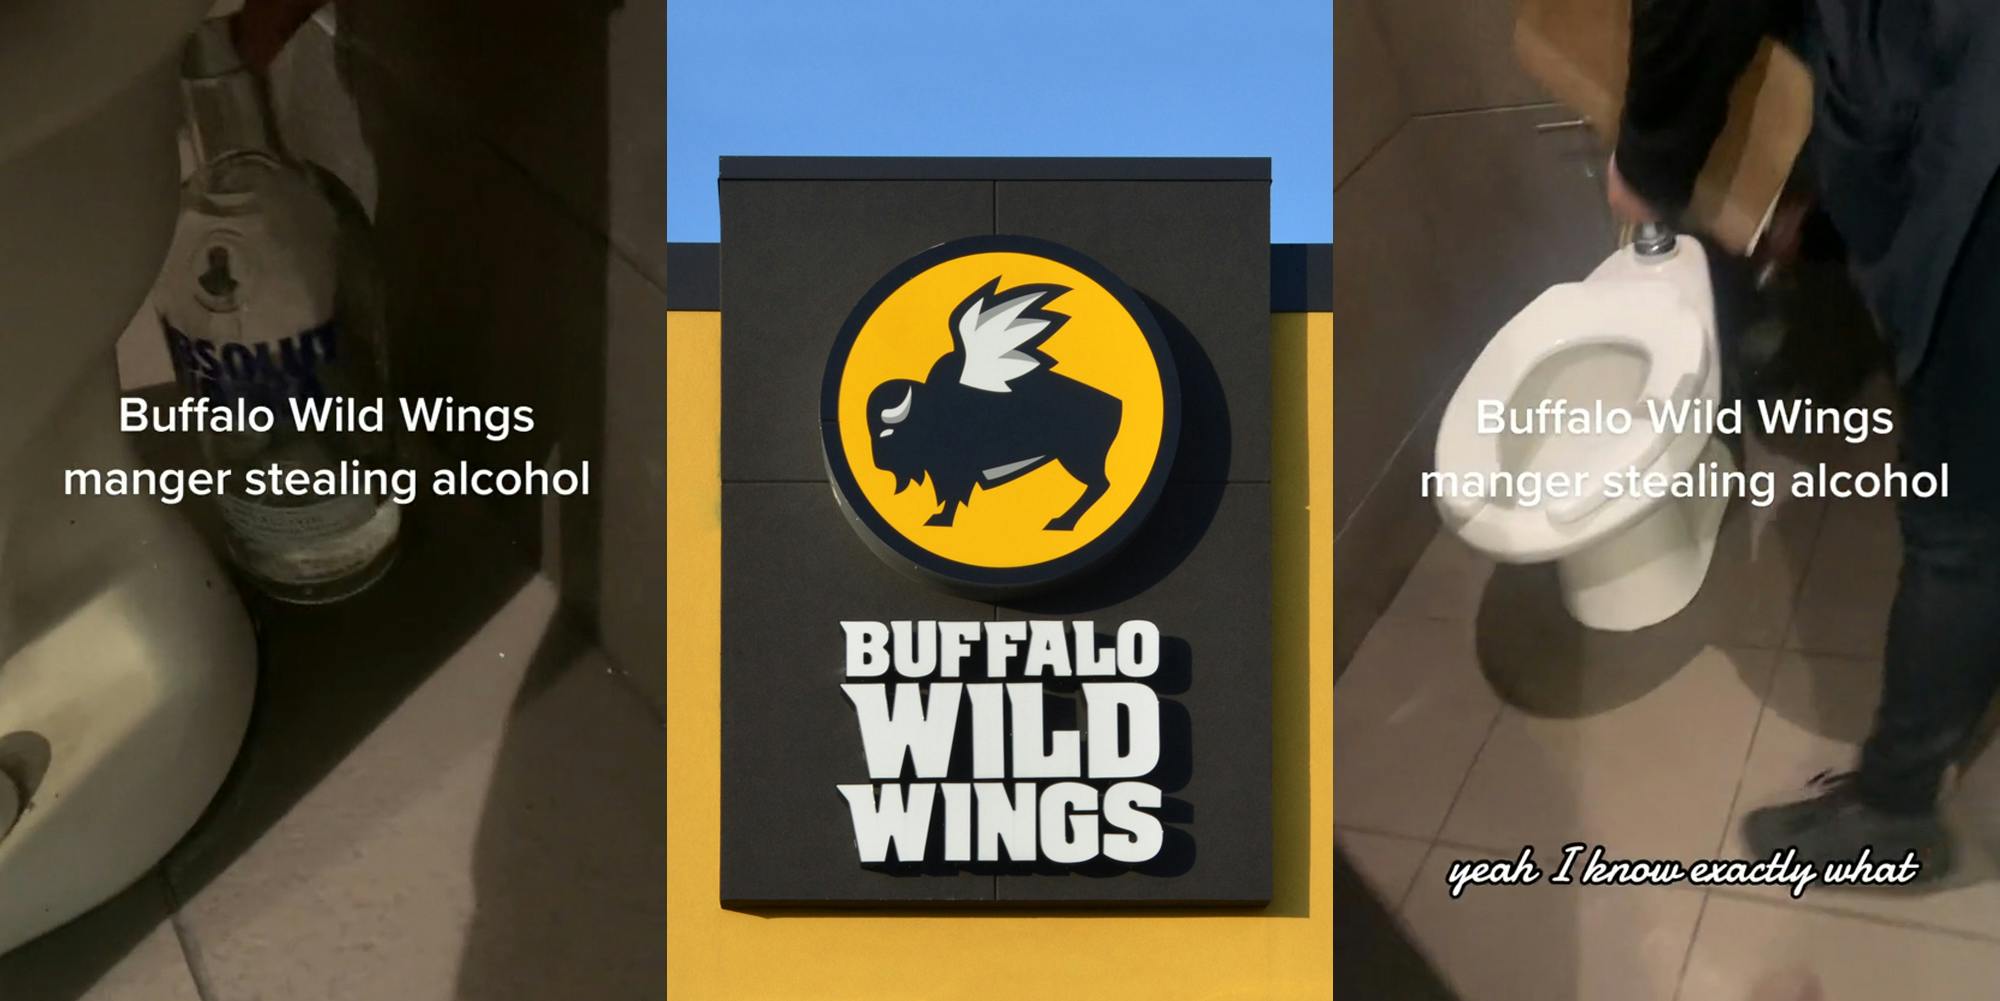 Buffalo Wild Wings toilet with Absolut Vodka bottle behind with caption "Buffalo Wild Wings manager stealing alcohol" (l) Buffalo Wild Wings sign with blue sky (c) Buffalo Wild Wings employee grabbing bottle from behind toilet with caption "Buffalo Wild Wings manager stealing alcohol yeah I know exactly what" (r)